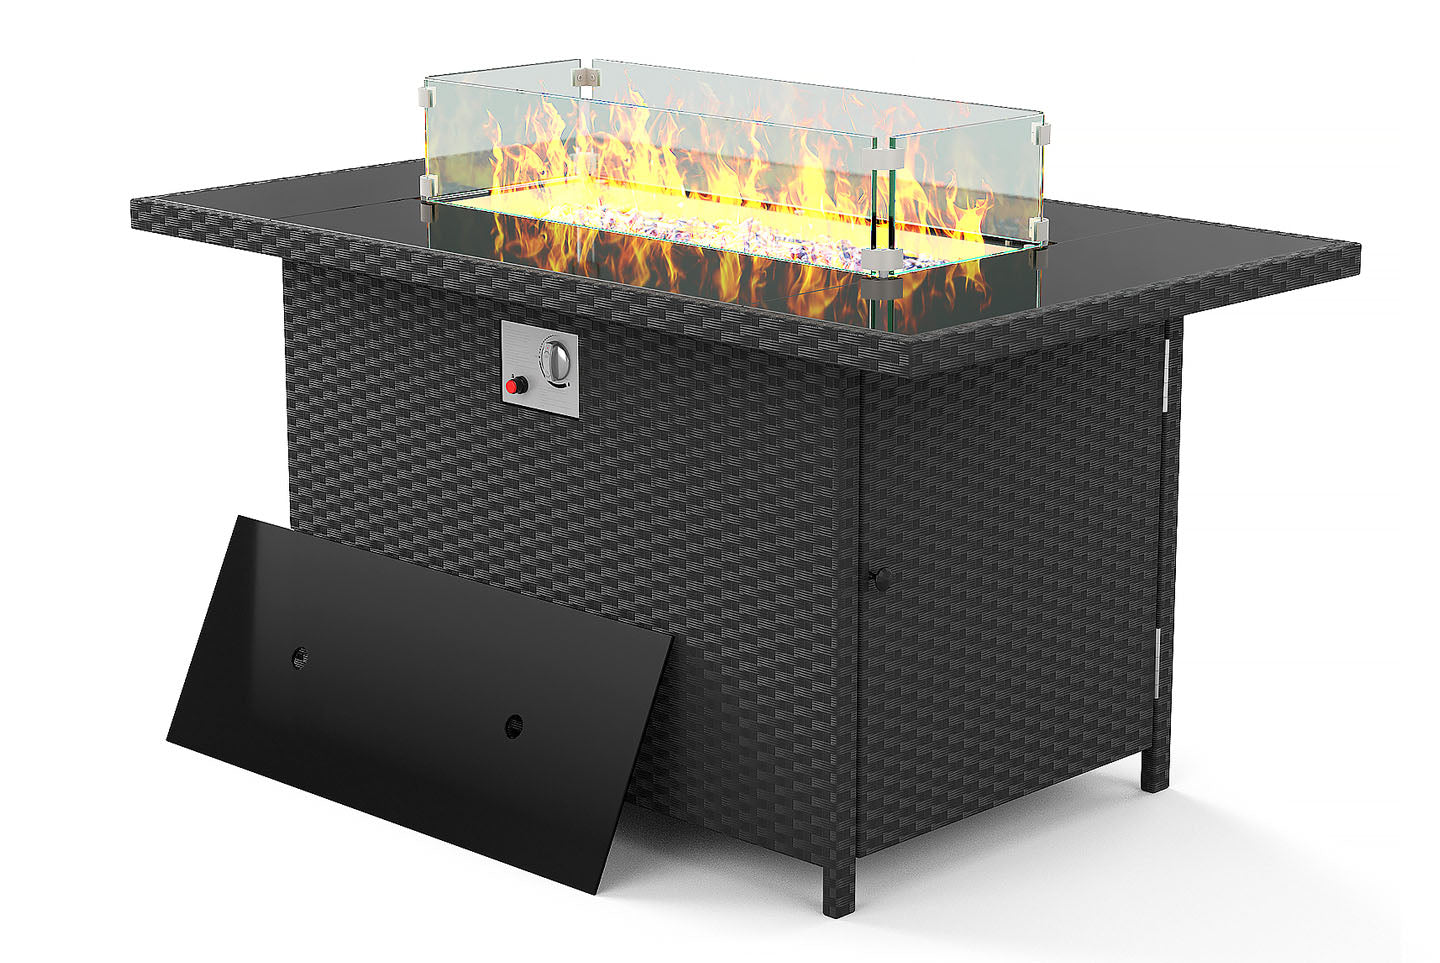 46 Inch 50000 BTU Outdoor Rectangular Rattan Fire Pit Table with Glass Wind Guard for Outside Patio Garden Backyard